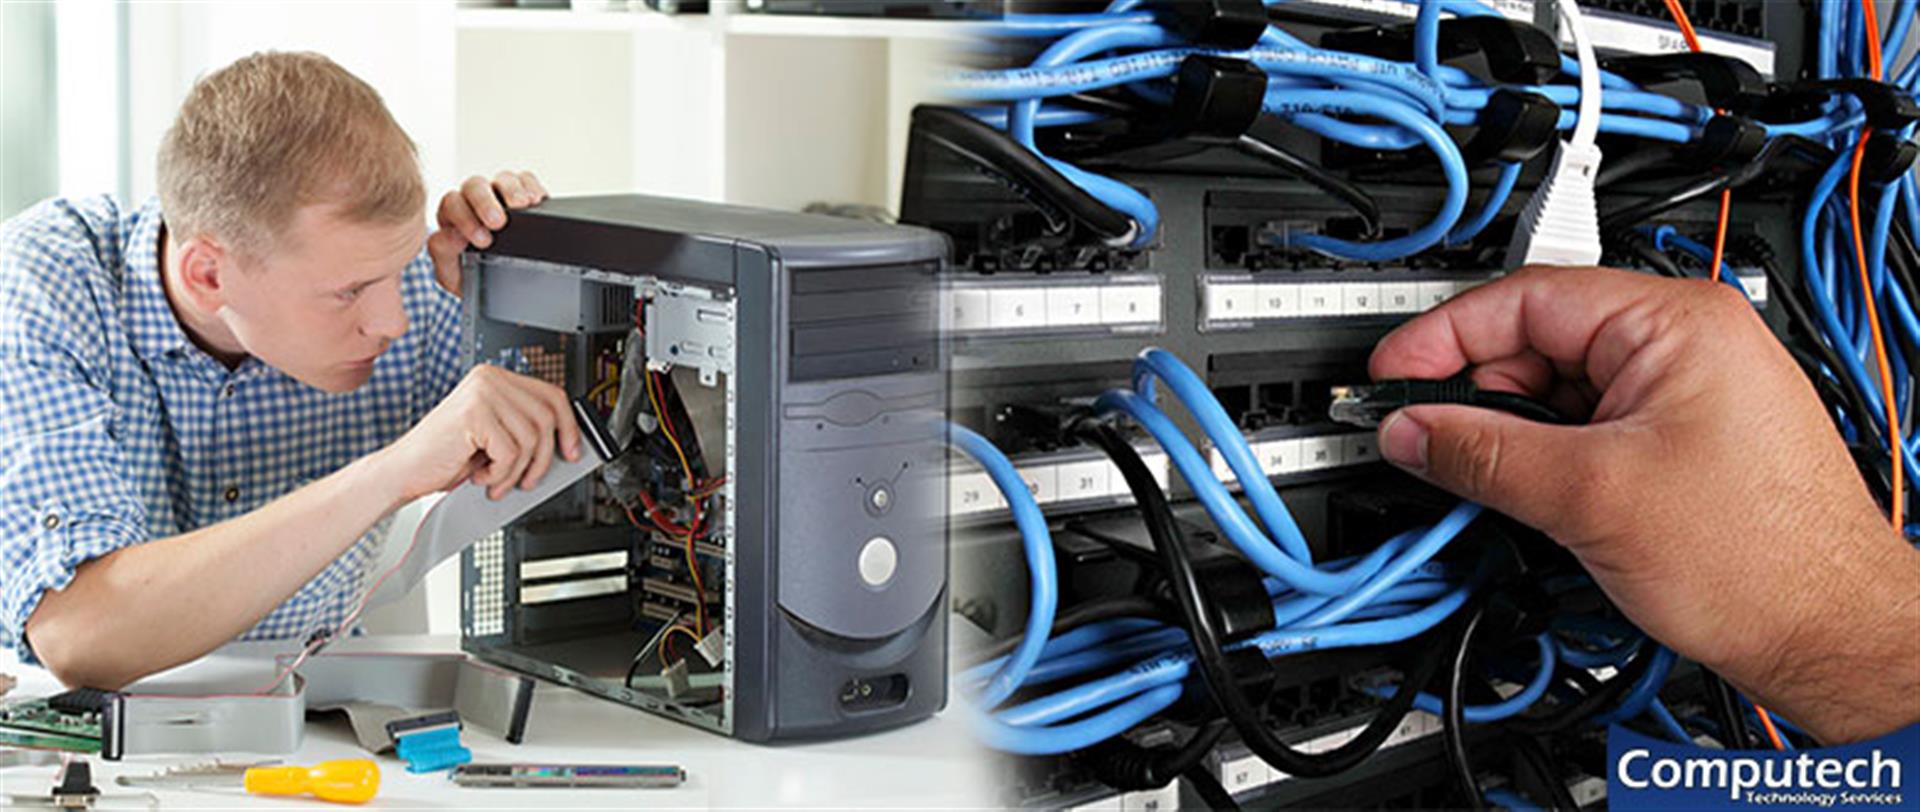 Centre Alabama Onsite Computer & Printer Repairs, Networks, Voice & Data Low Voltage Cabling Services